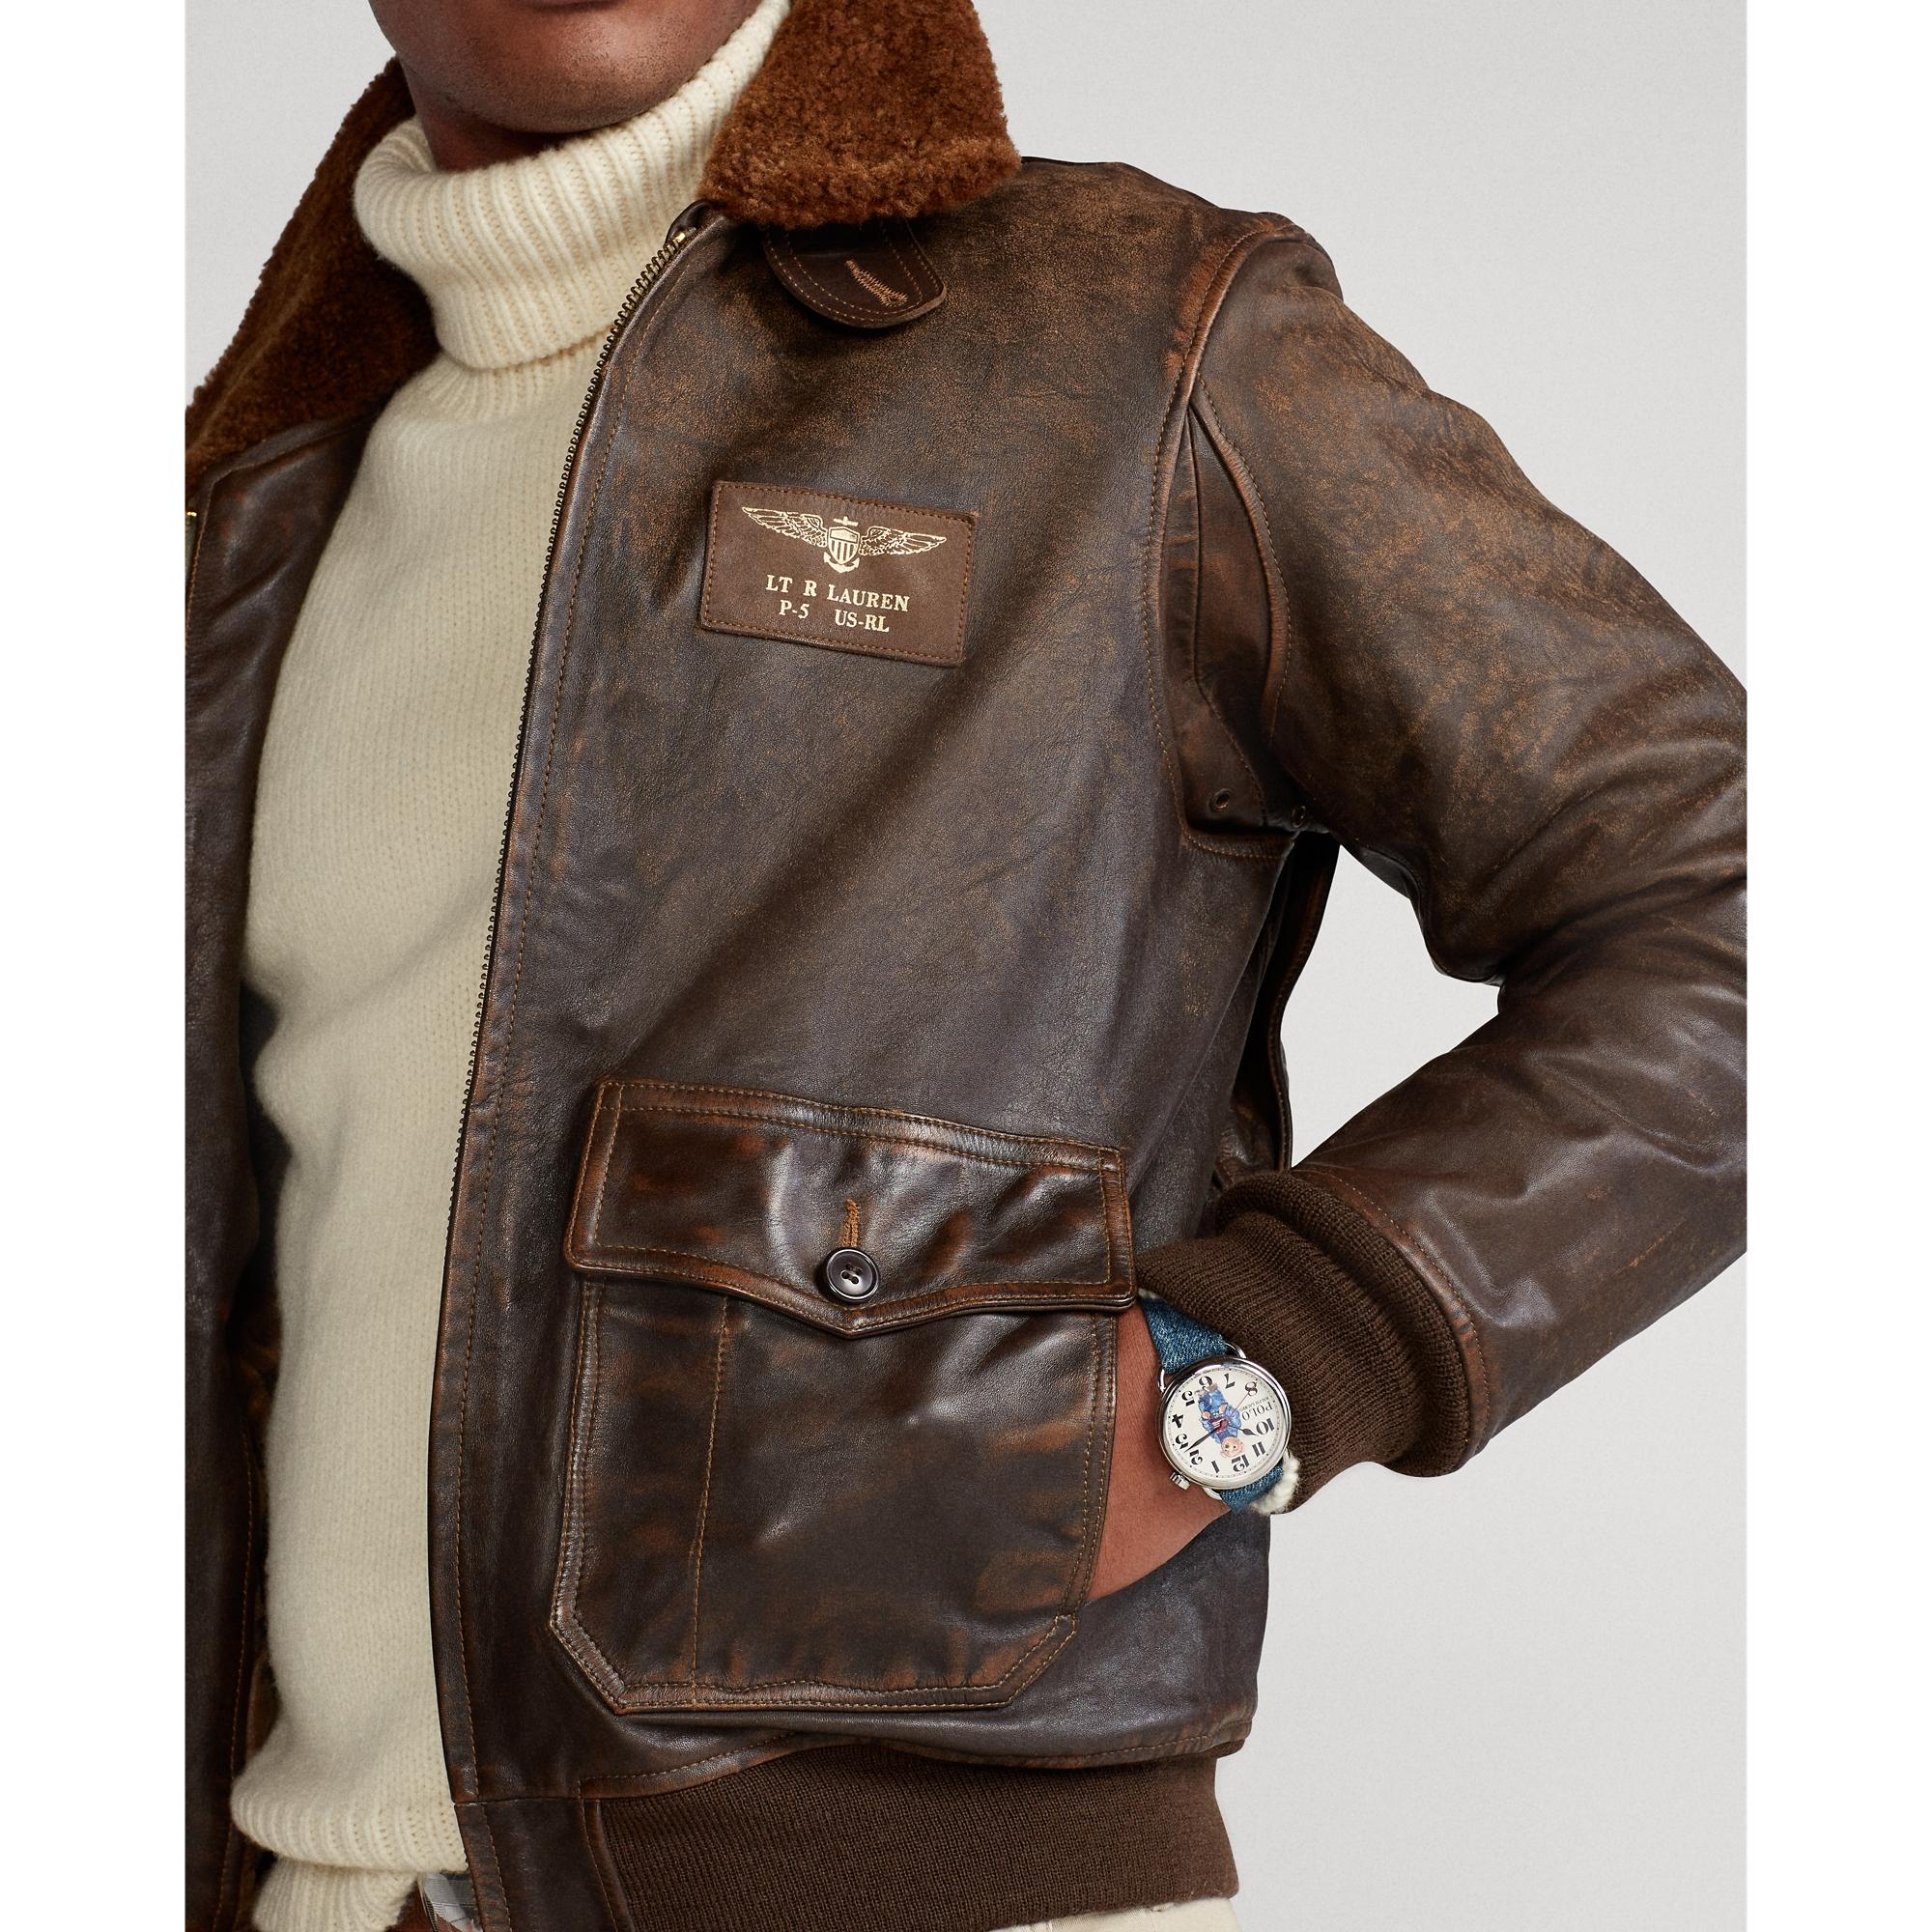 Polo Ralph Lauren Leather The Iconic Bomber Jacket in Brown for Men - Lyst